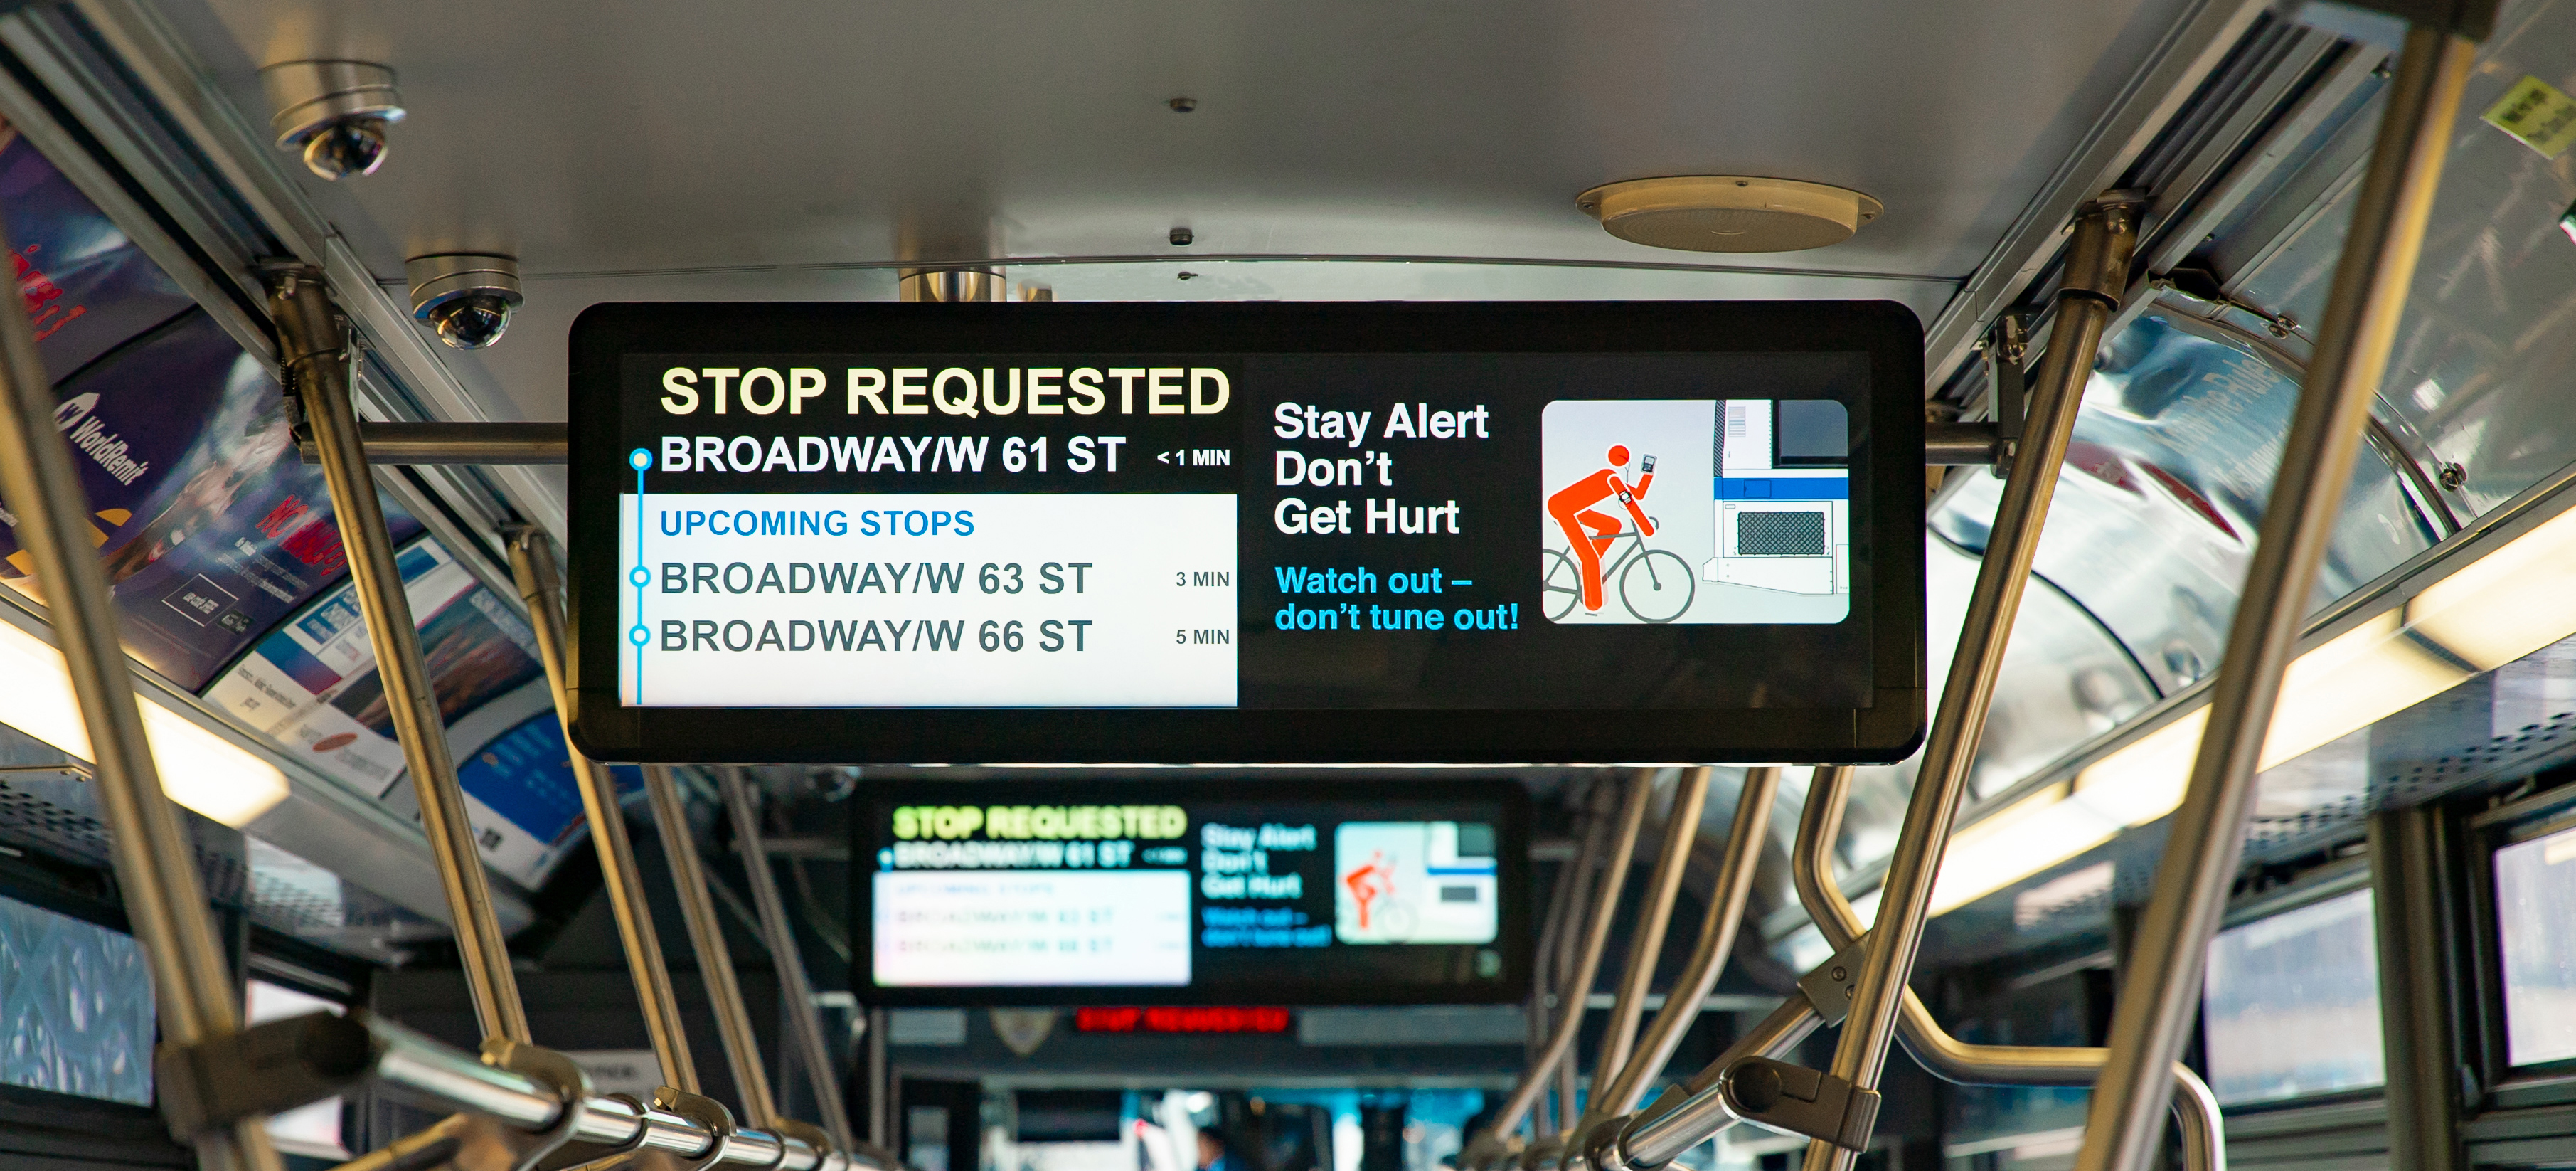 How Onboard Digital Signage Can Help Transit Agencies Improve Perceptions and Enhance the Rider Experience